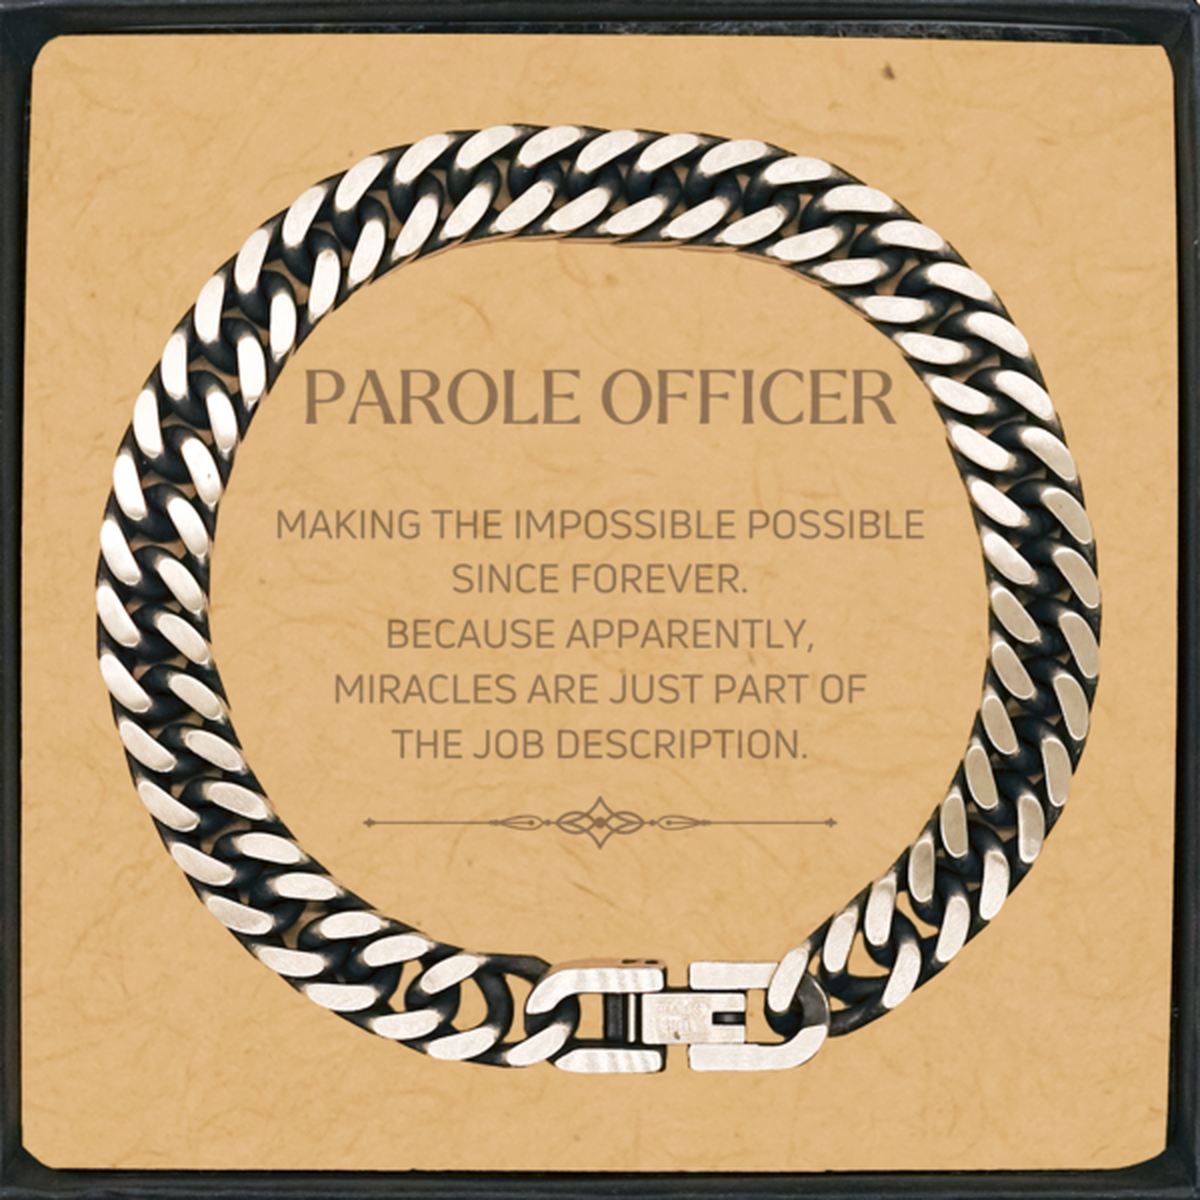 Funny Parole Officer Gifts, Miracles are just part of the job description, Inspirational Birthday Cuban Link Chain Bracelet For Parole Officer, Men, Women, Coworkers, Friends, Boss